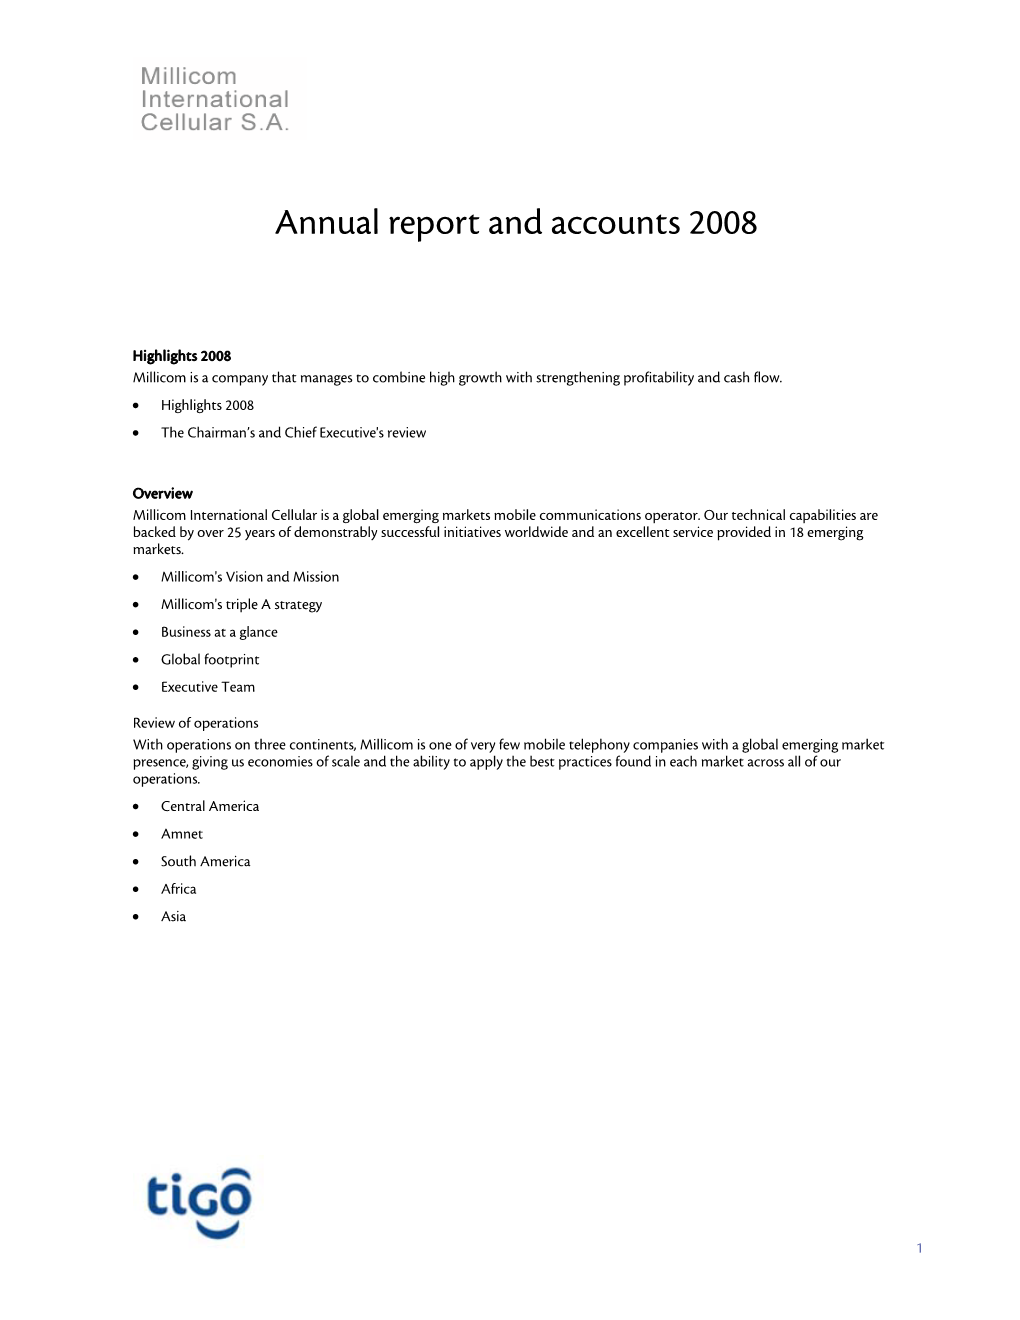 Annual Report and Accounts 2008